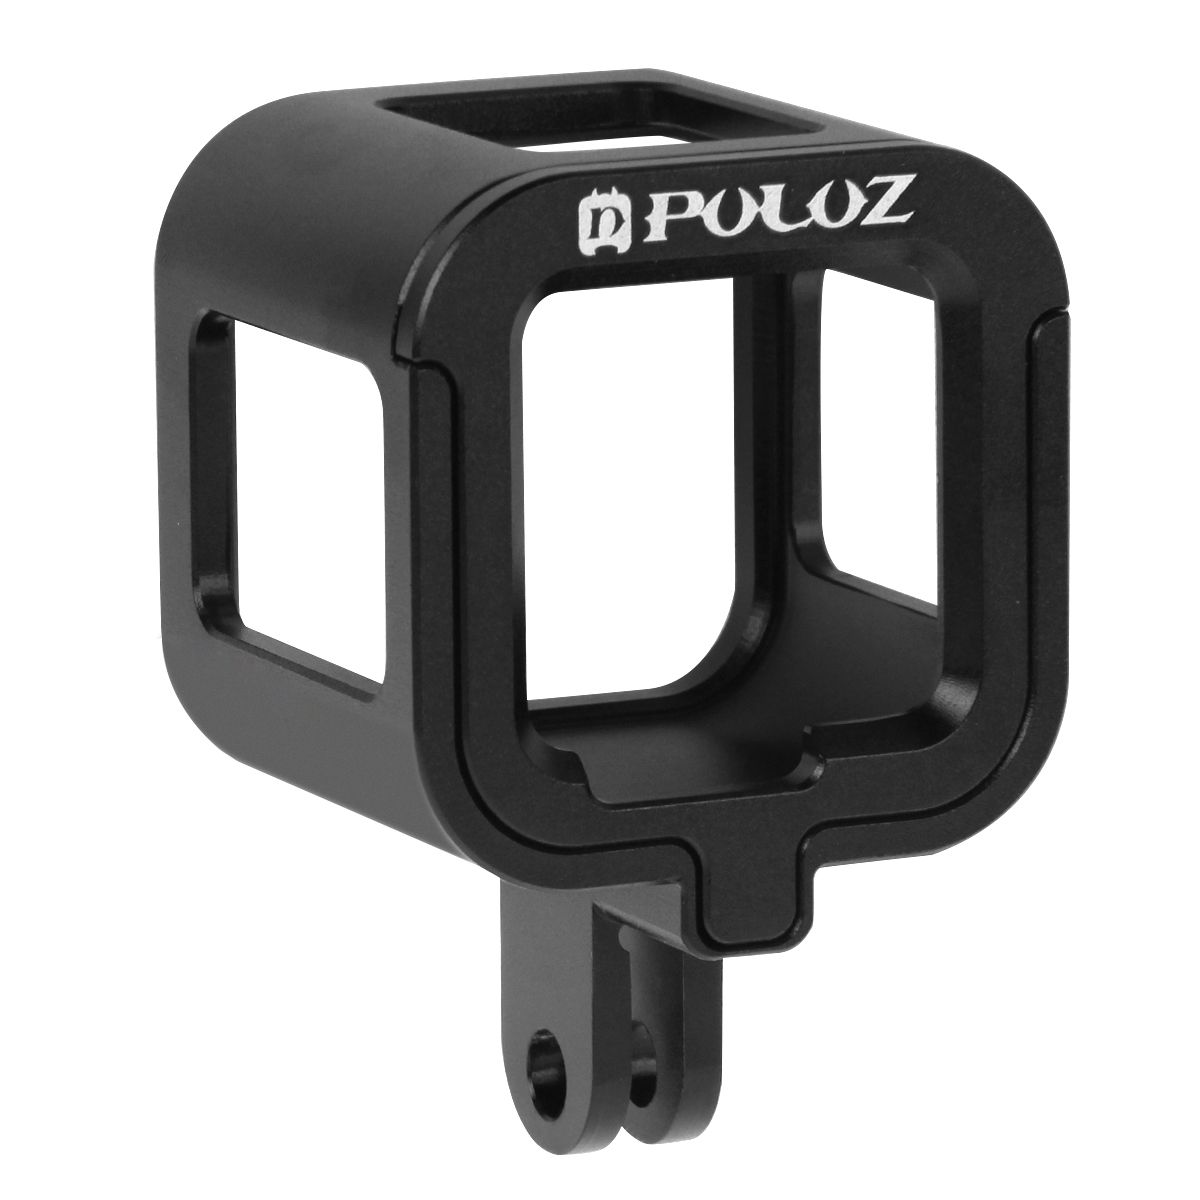 PULUZ-PU158-Housing-Shell-Aluminum-Alloy-Protective-Cage-Case-for-GoPro-HERO4-HERO-4-Session-1200358